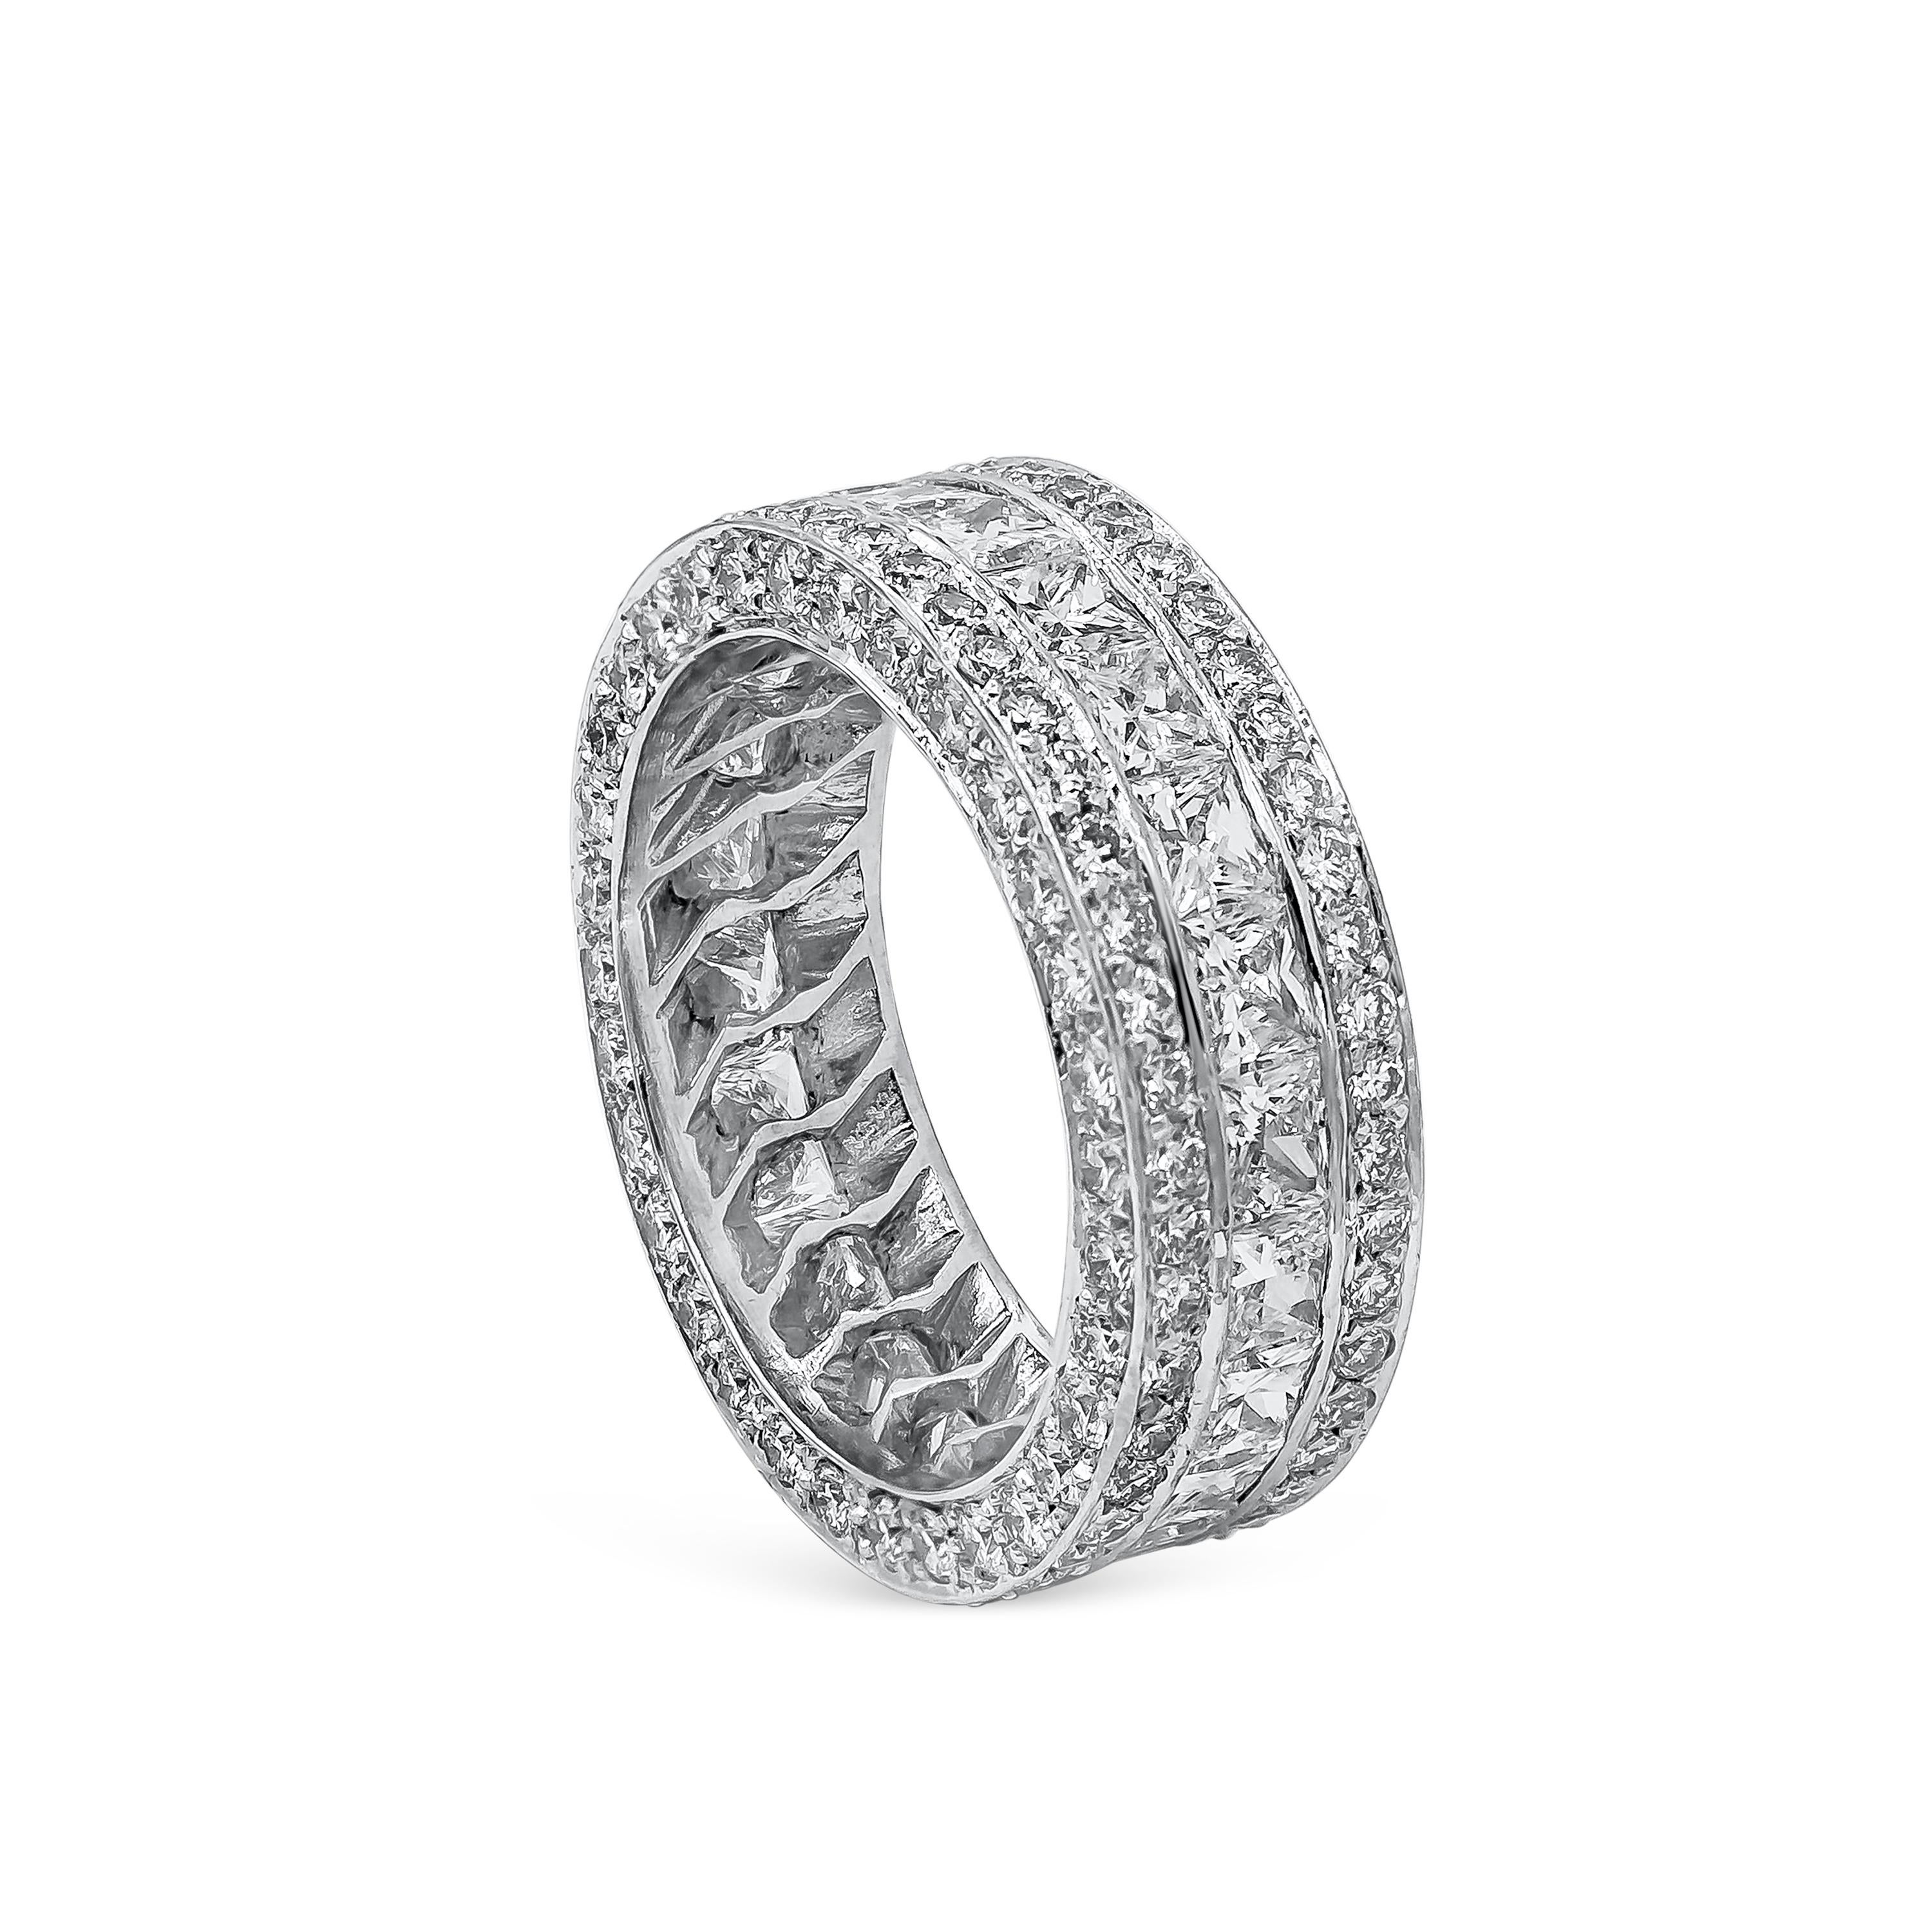 A sparkly ring perfect for special occasions or galas. Showcasing two rows of round brilliant diamonds, spaced by a row of princess cut diamonds. Round diamonds weigh 2.40 carats total, princess cut diamonds weigh 2.75 carats total. Made in polish